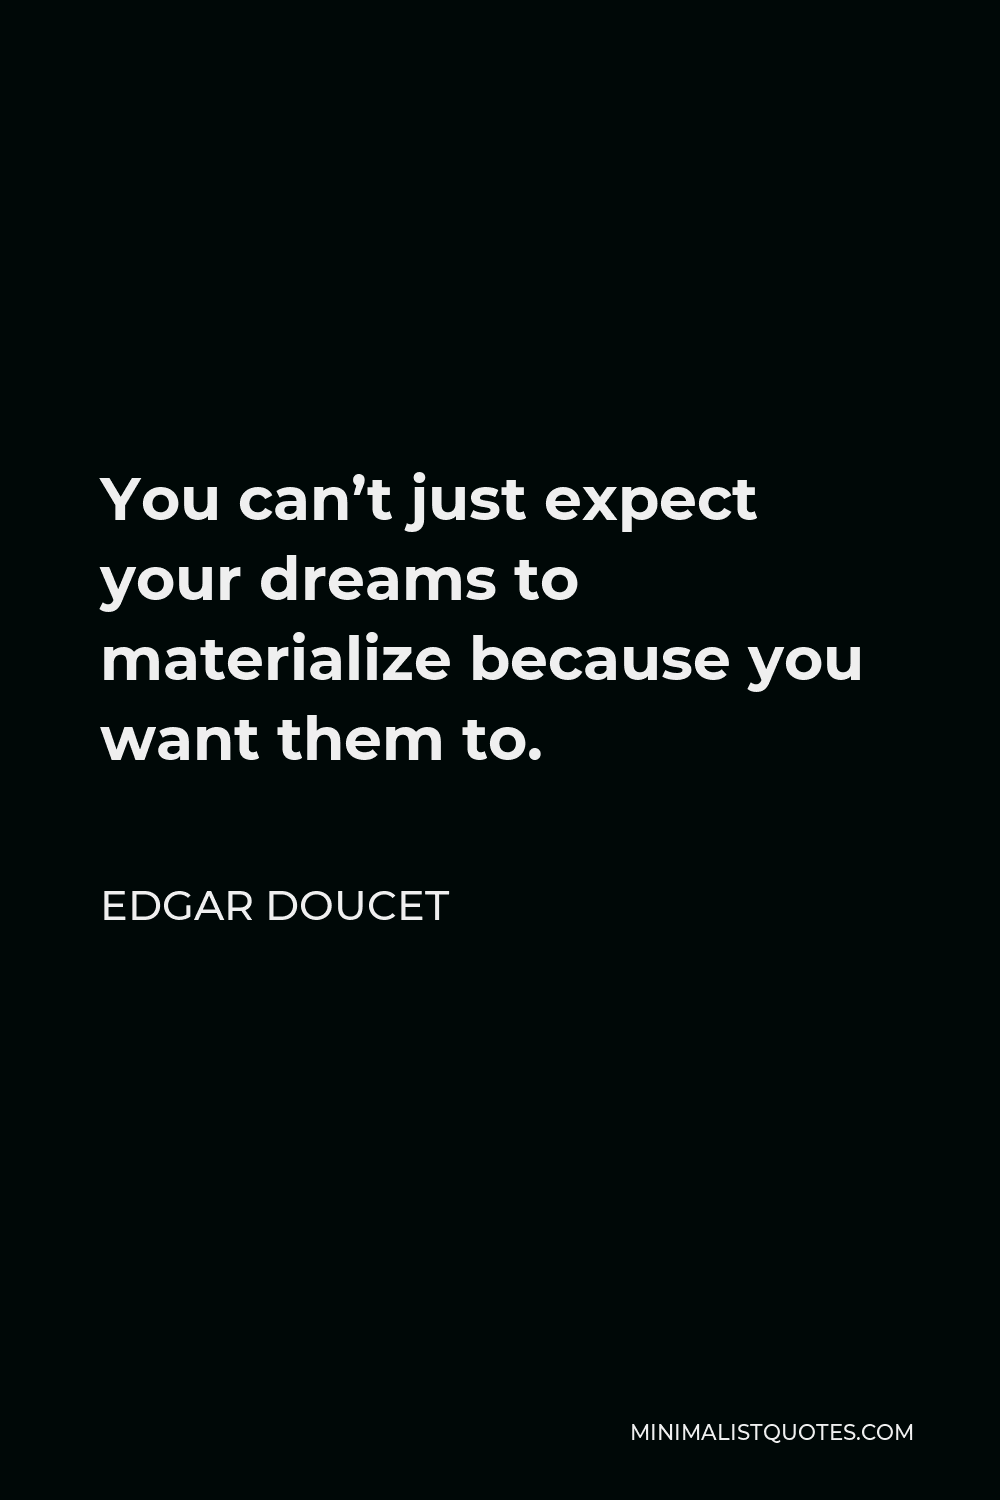 Edgar Doucet Quote - You can’t just expect your dreams to materialize because you want them to.